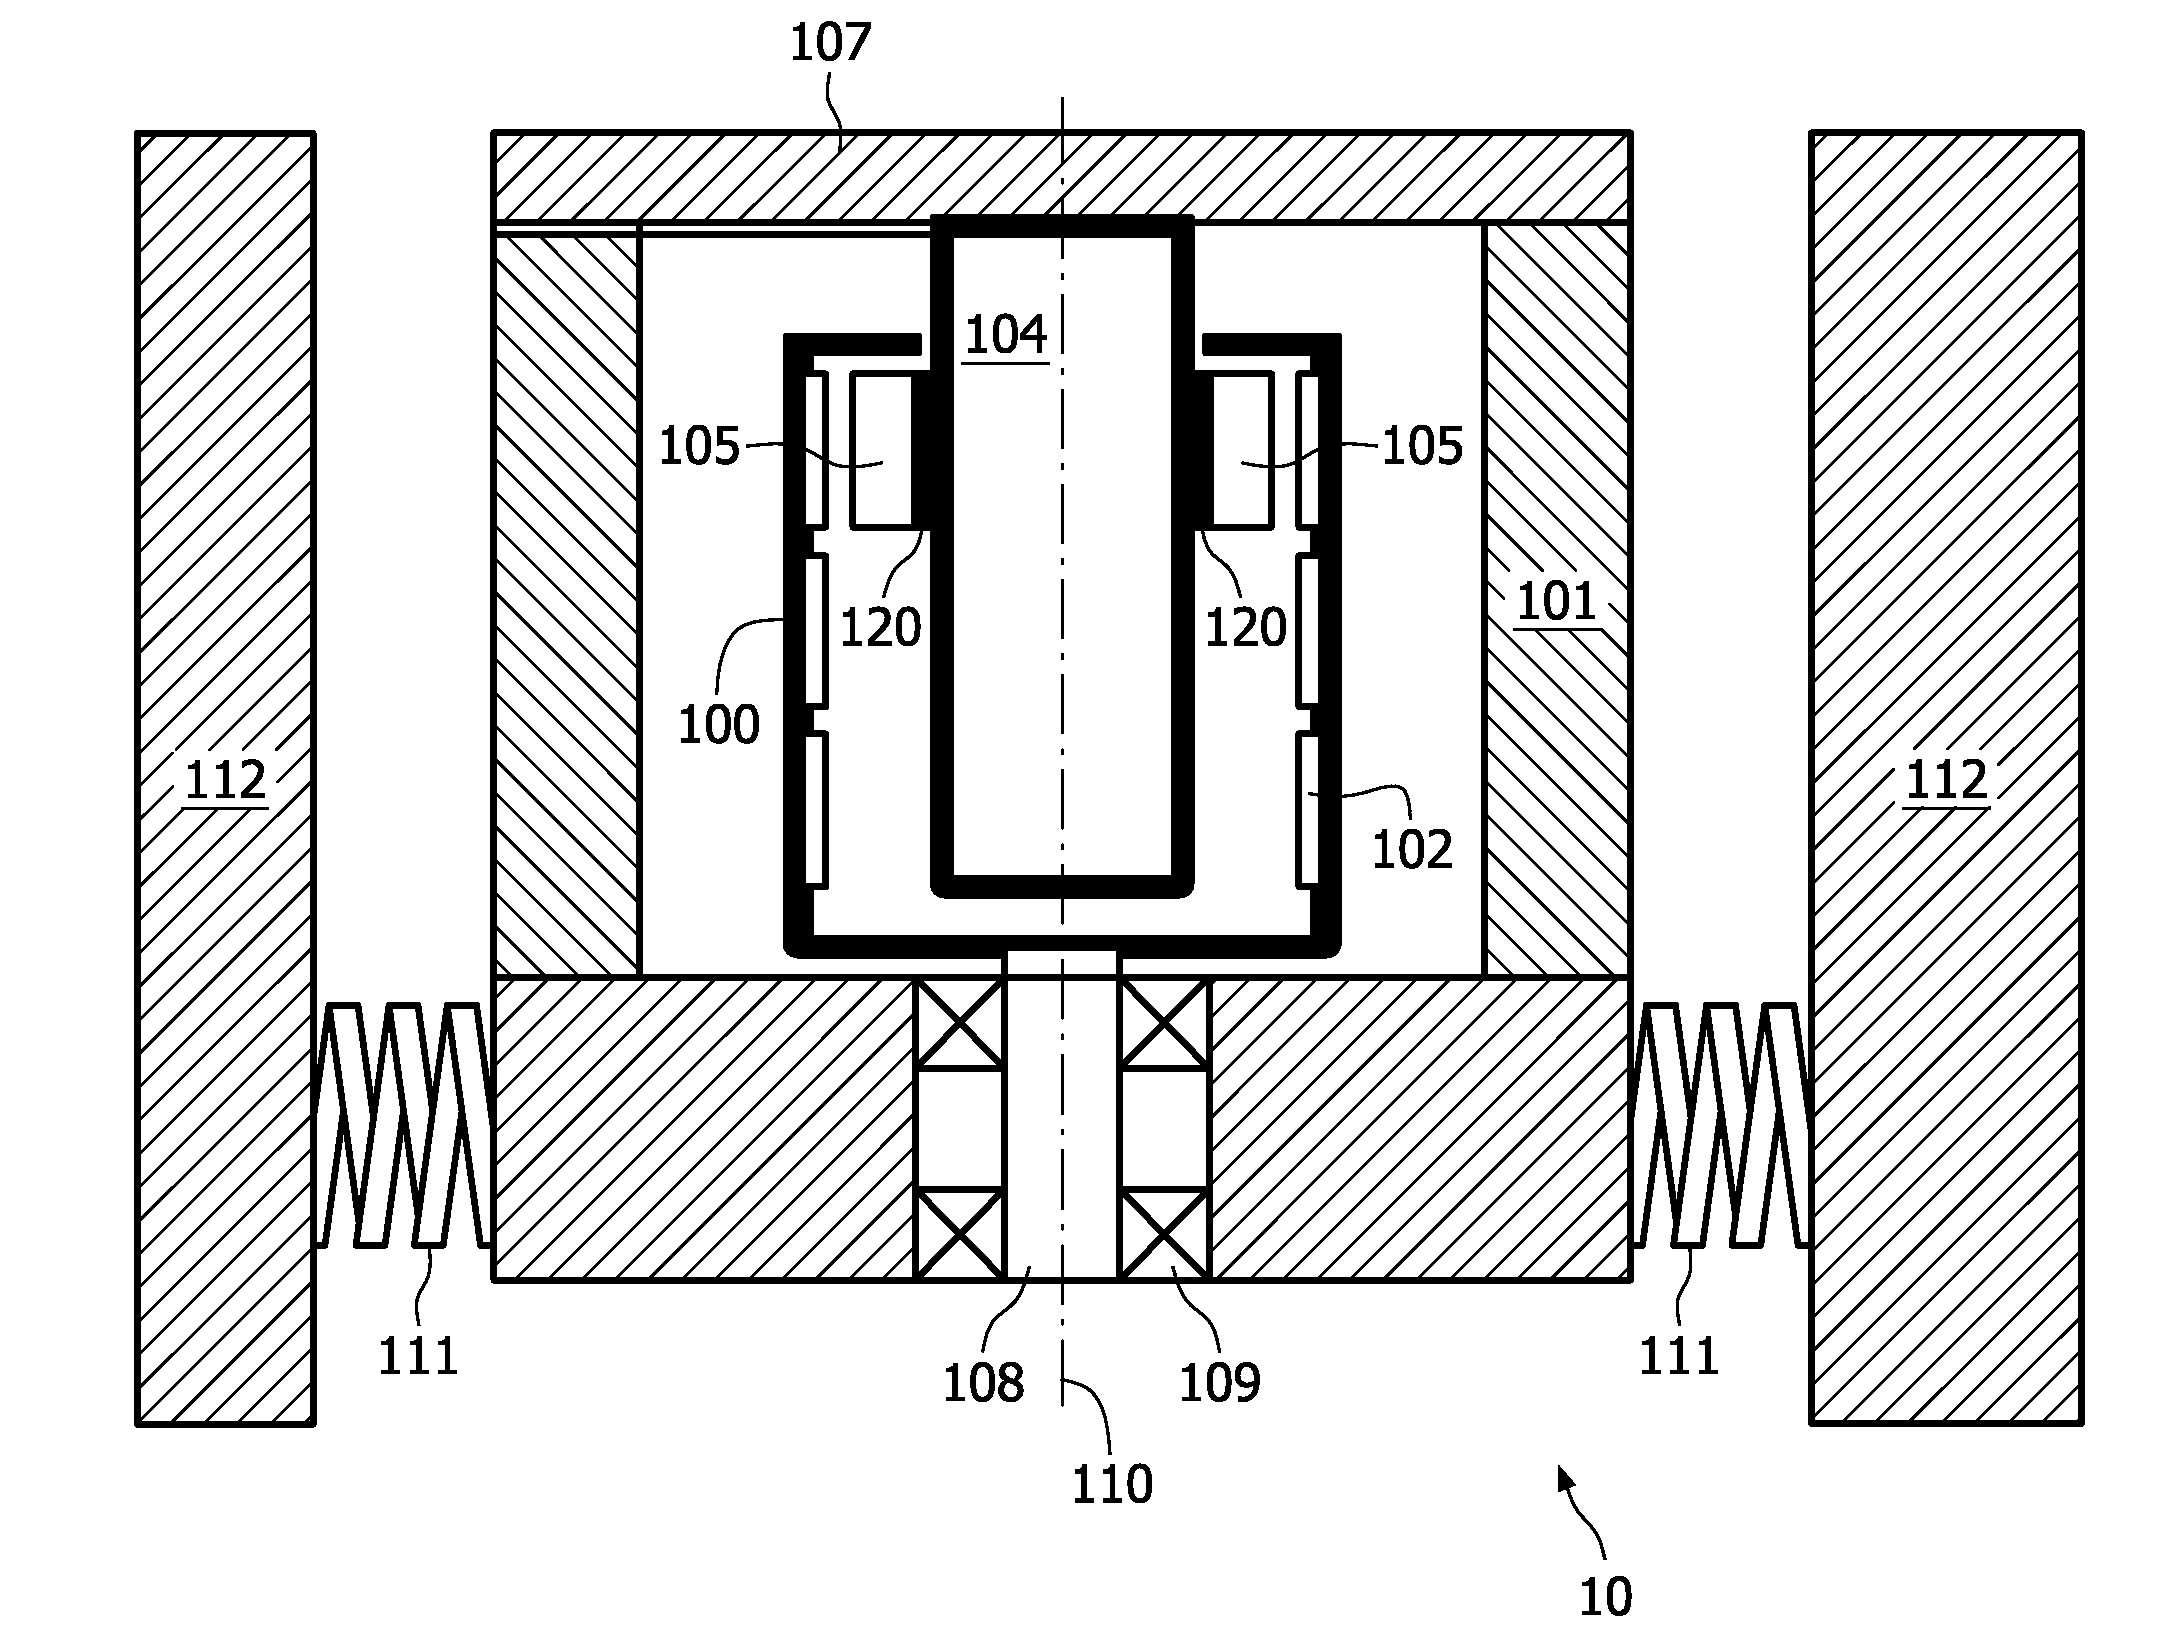 Ink-jet device and method for producing a biological assay substrate using a printing head and means for accelerated motion